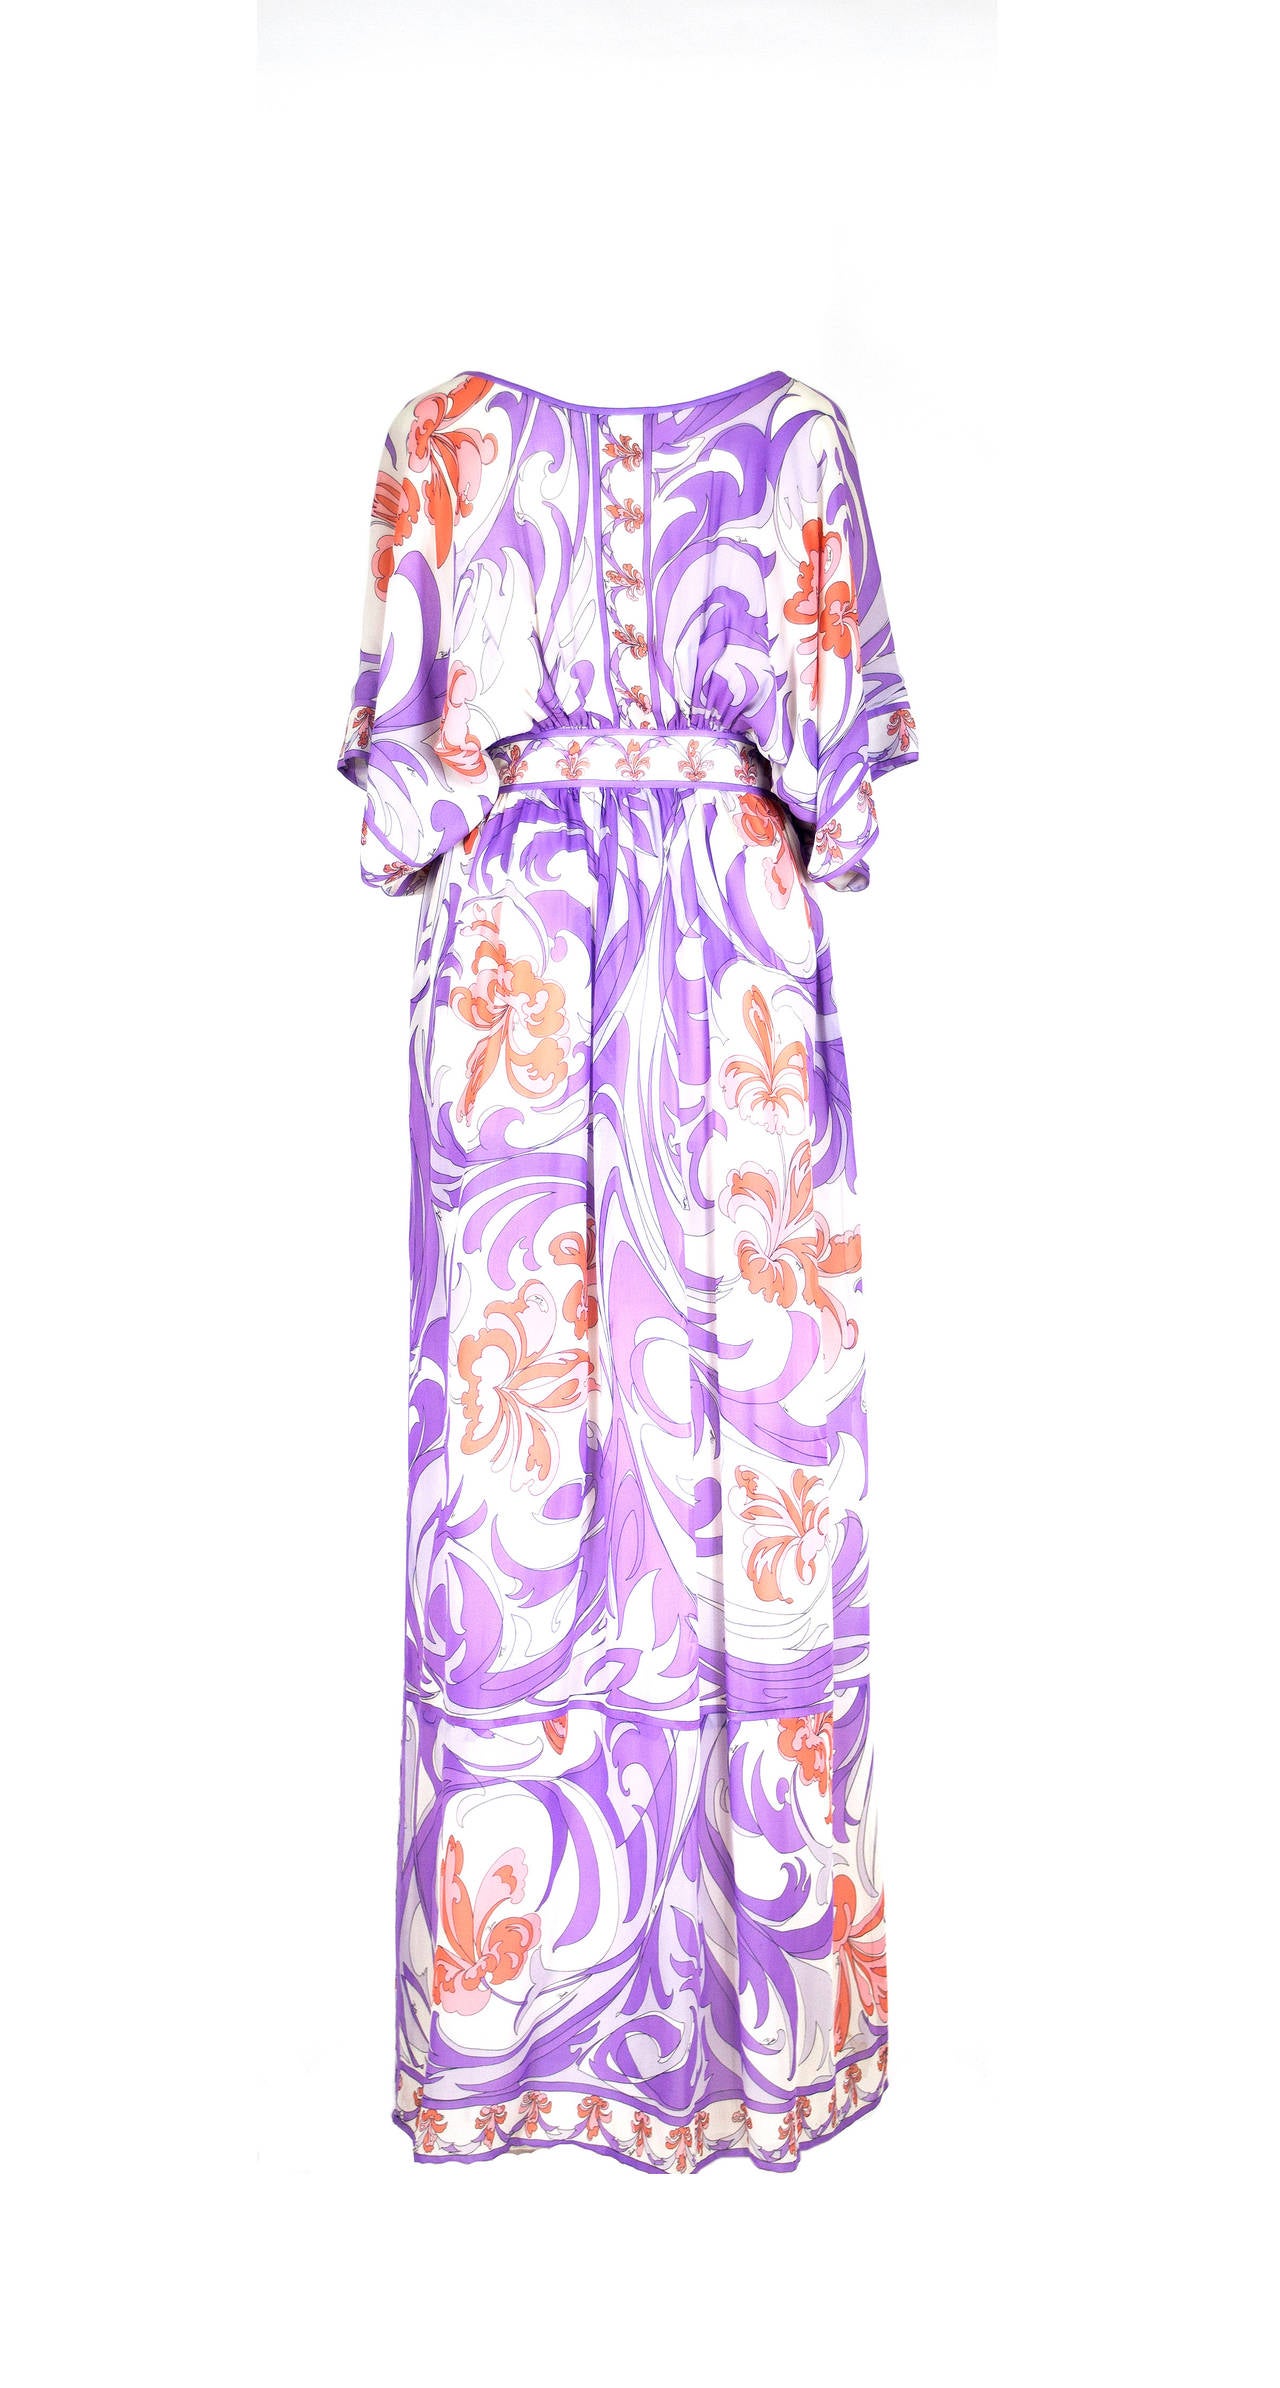 Vintage Emilio Pucci 1960's Iconic floral print dress with fitted waist and floor length skirt. Dress has butterfly shaped sleeves with a fitted yoke at waist. Scooped neck with delicate drawstring for closure. Dress has side zipper to give it that